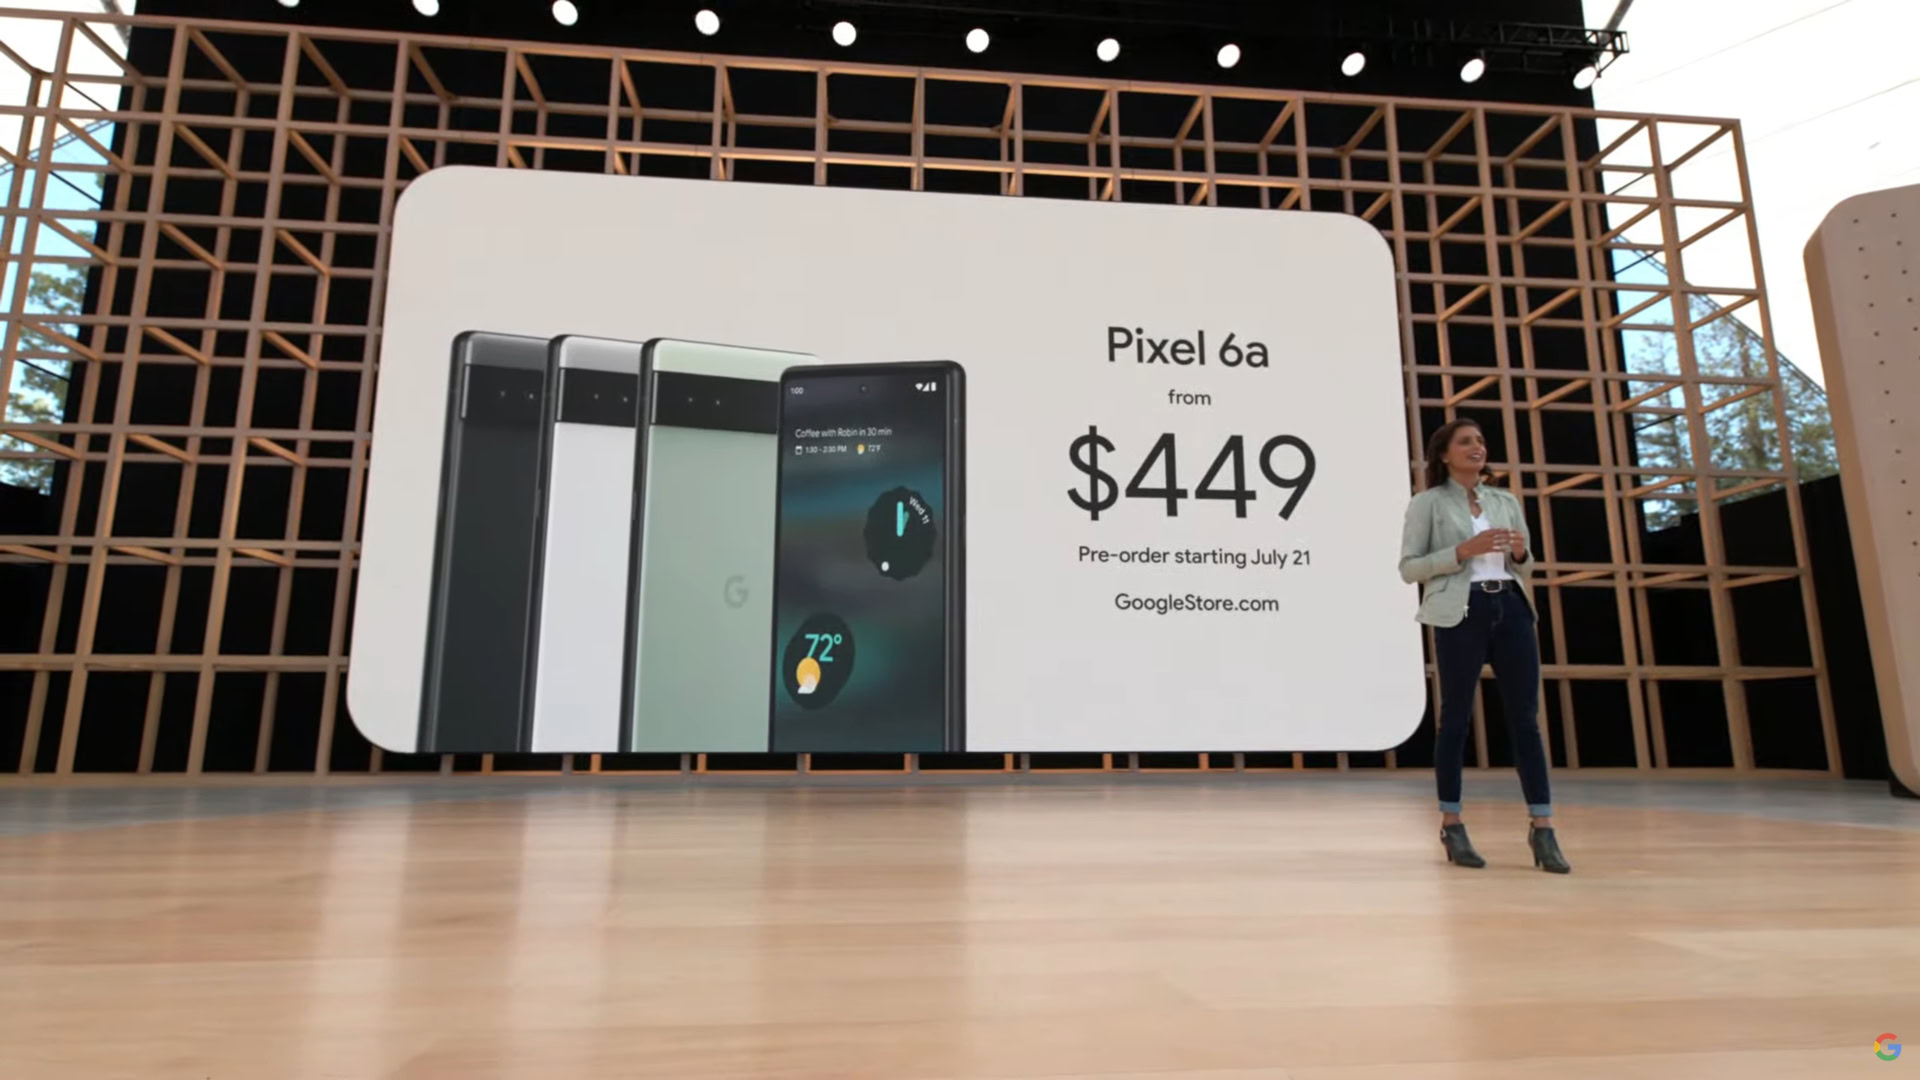 We asked, you told us: You’d buy the Pixel 6 over Pixel 6a